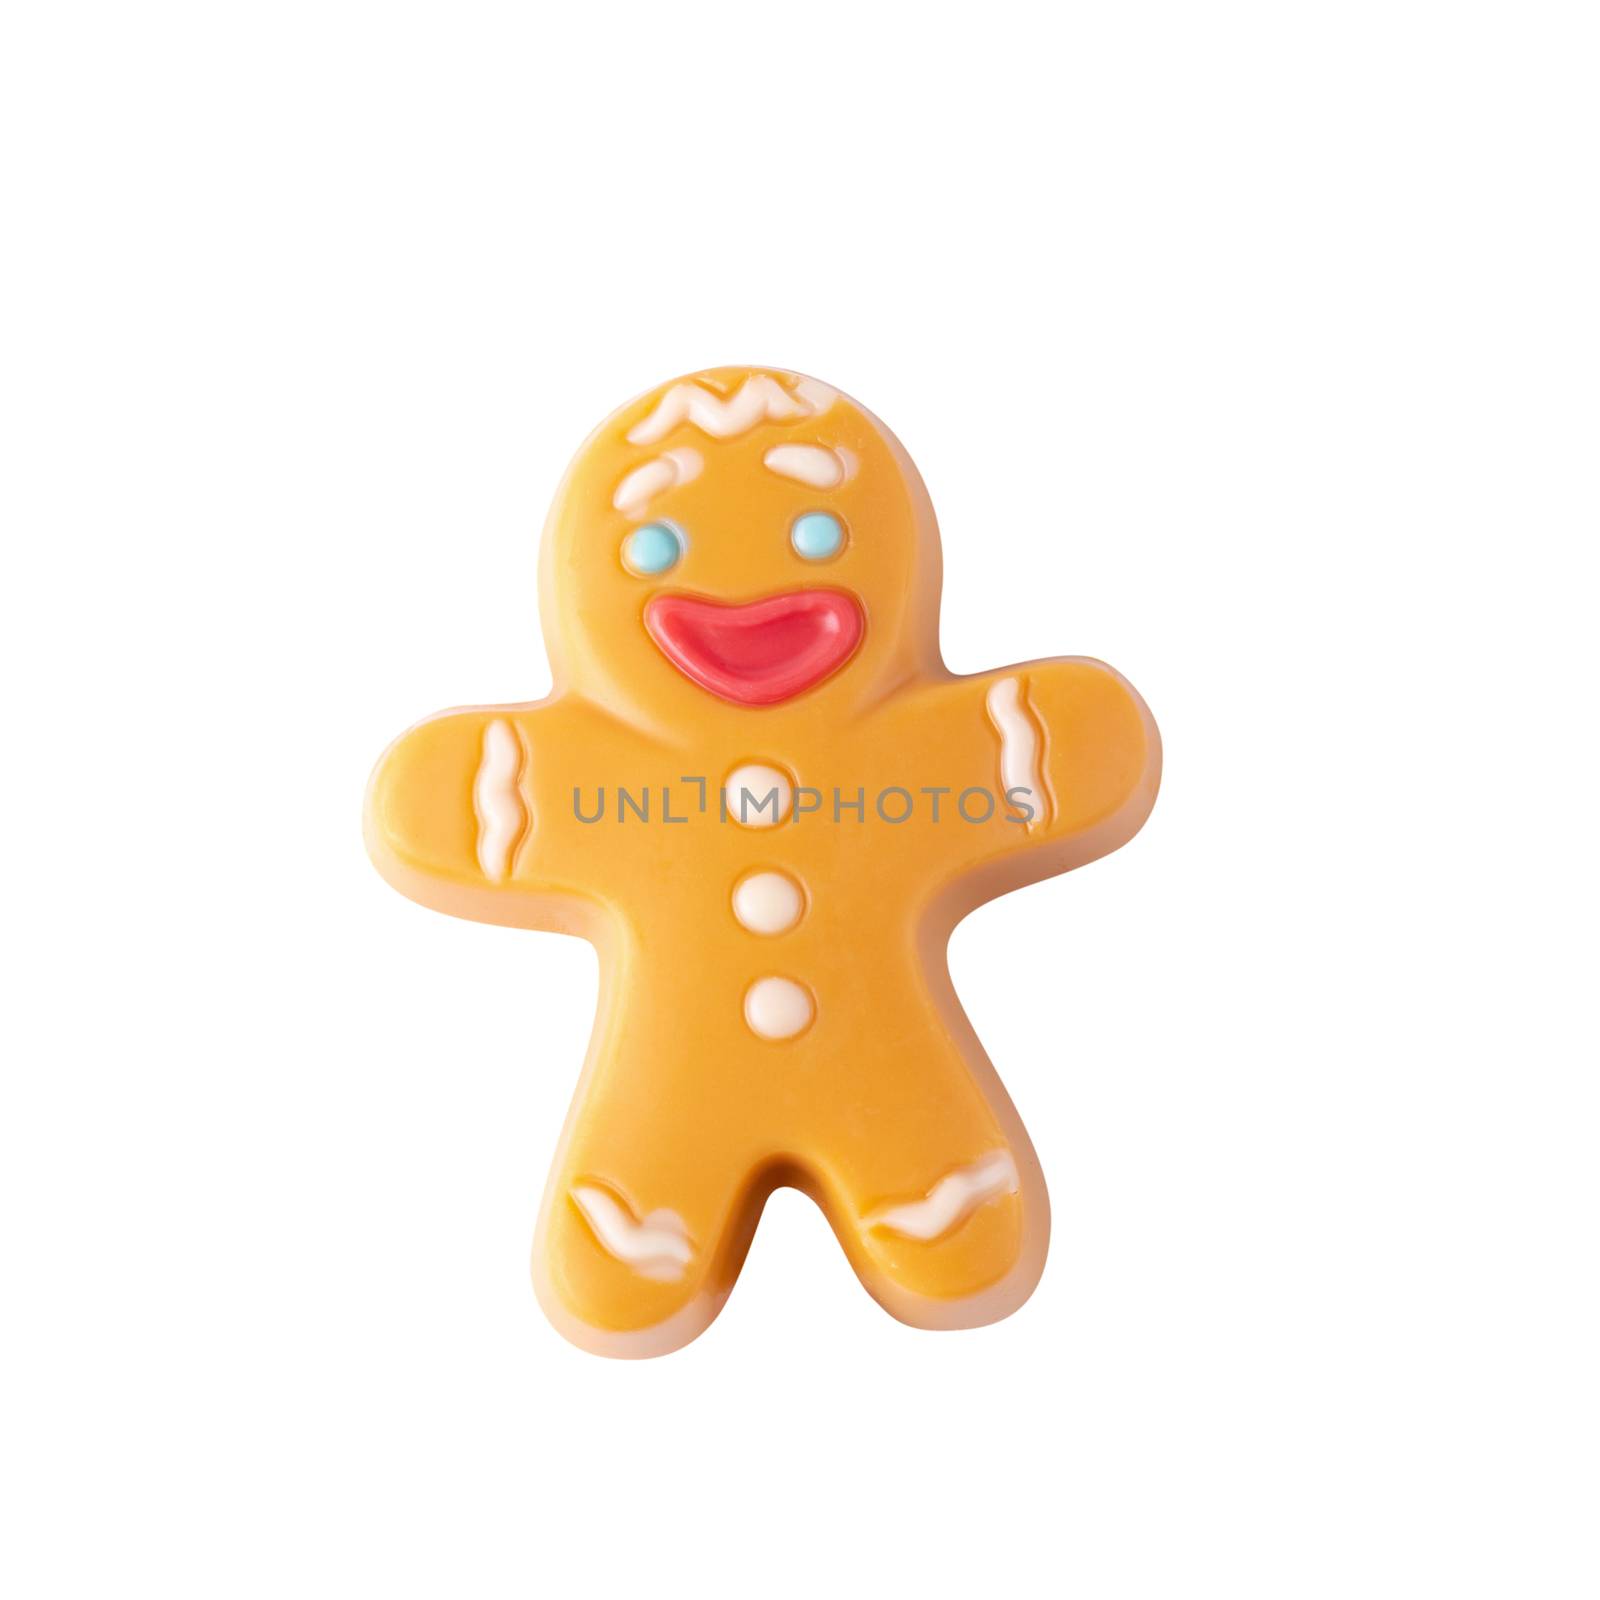 Chocolate Christmas gingerbread man decorated with white lines isolated over white background